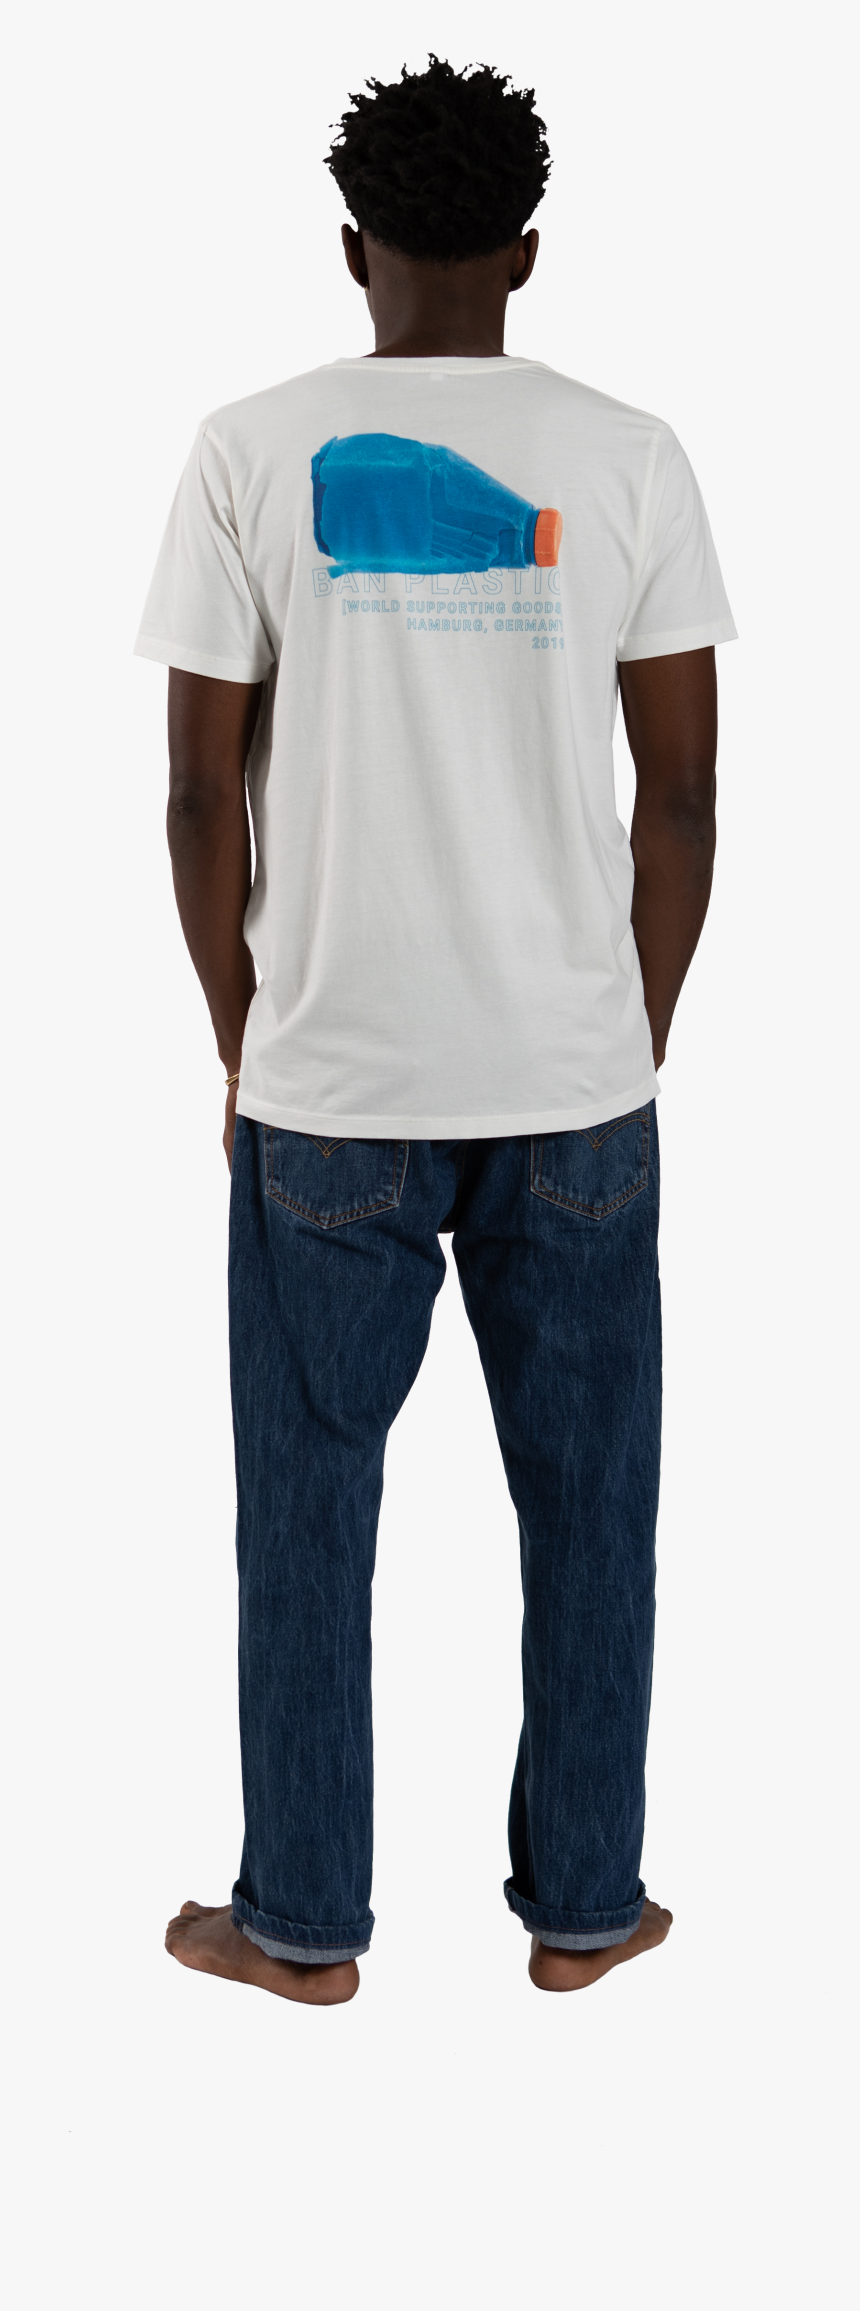 Image Of Ban Plastic Tee - Standing, HD Png Download, Free Download